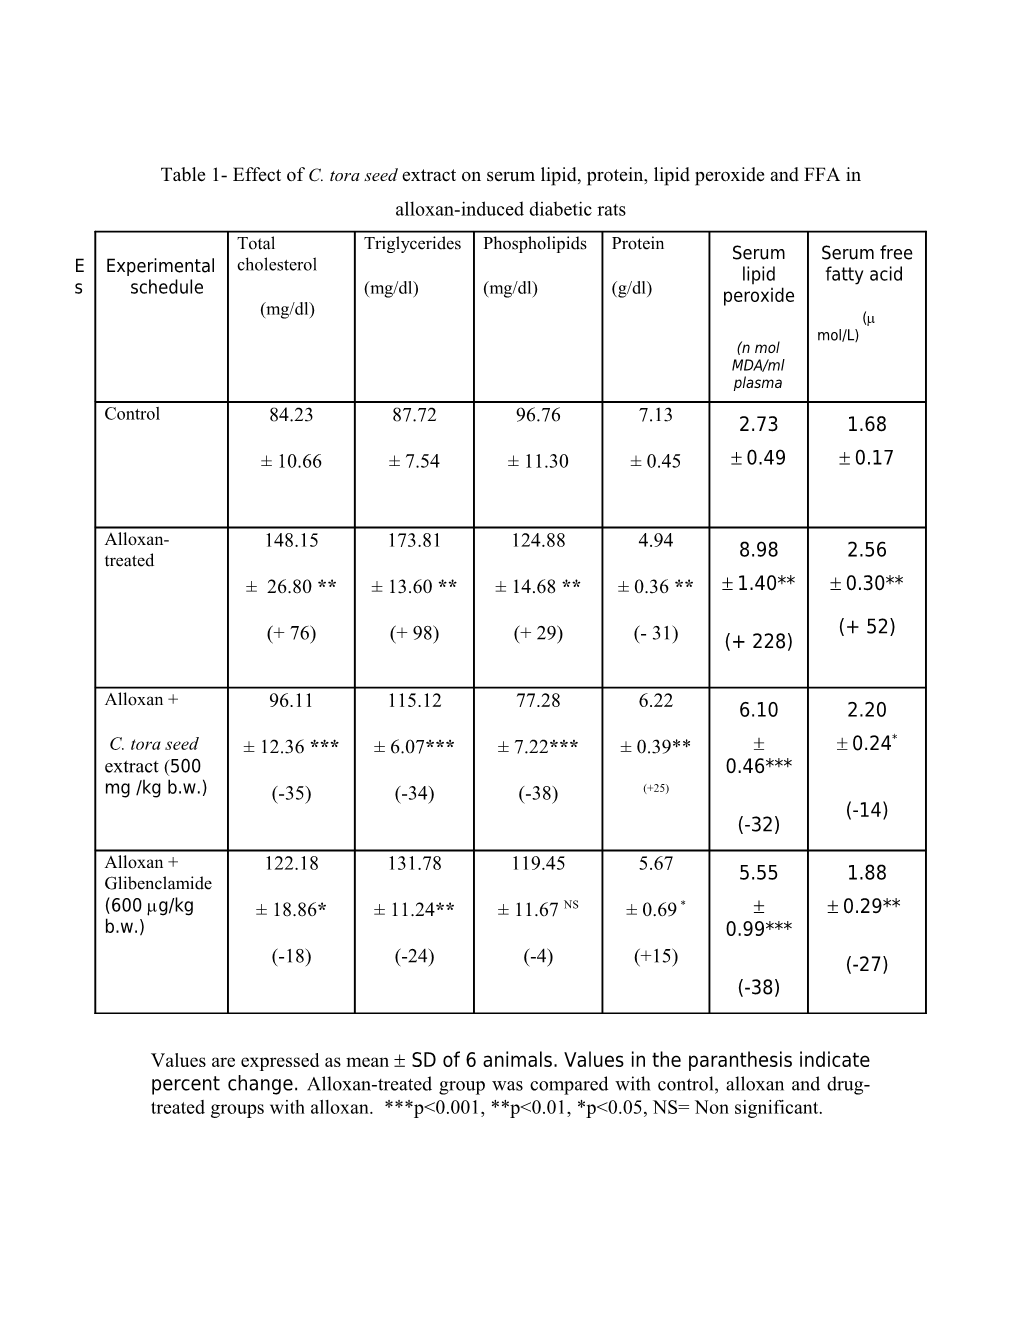 Table 1- Effect of C. Tora Seed Extract on Serum Lipid, Protein, Lipid Peroxide and FFA